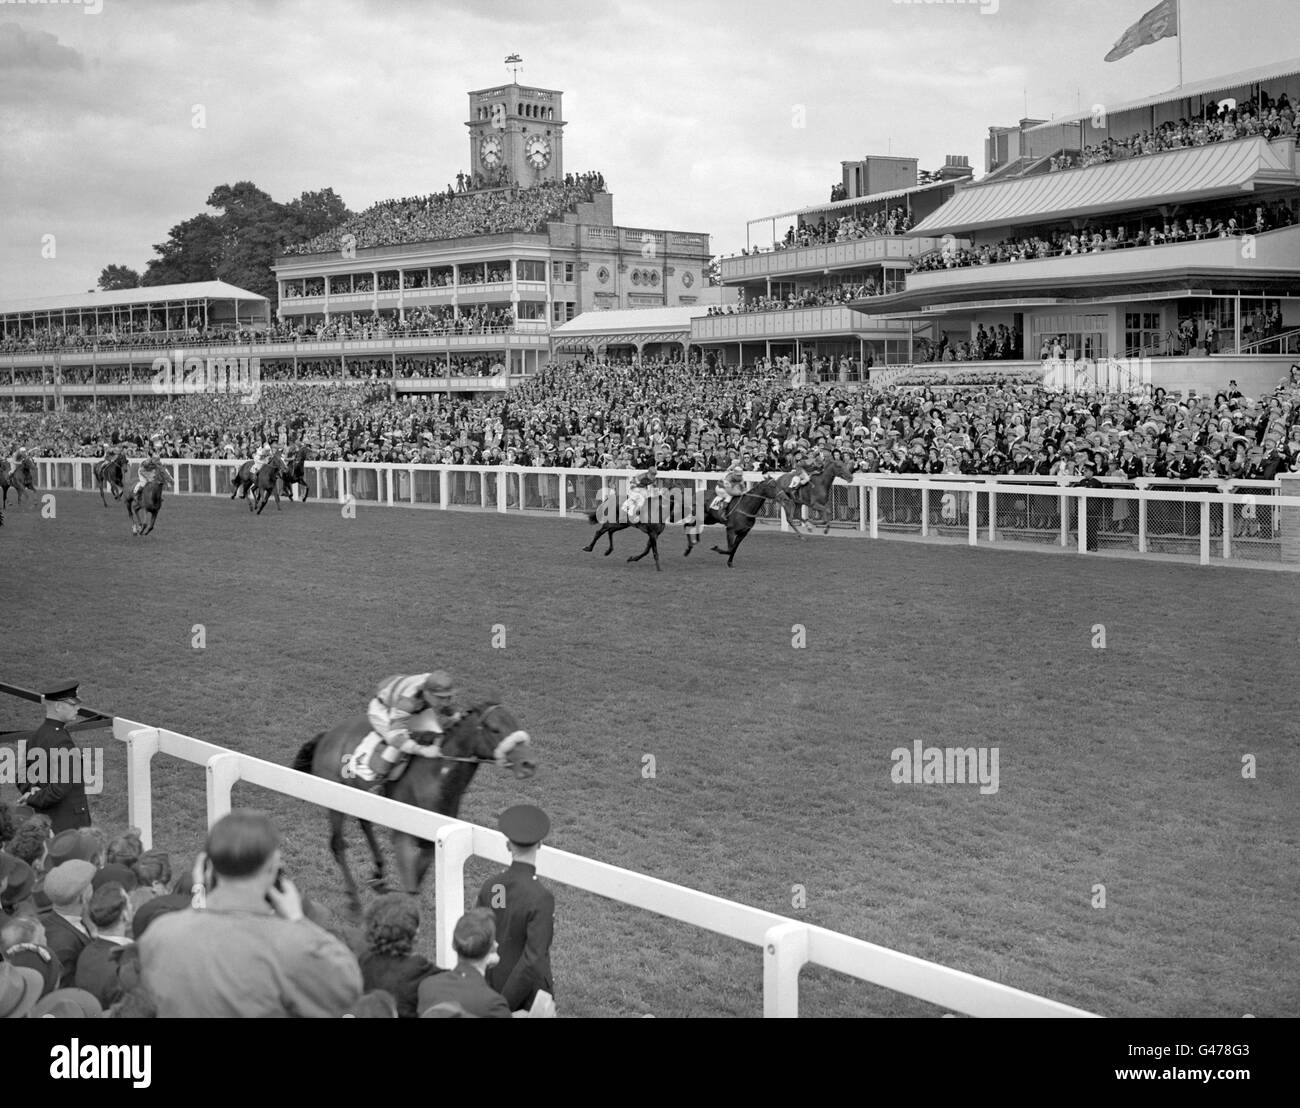 Master Vote (no.4, nearest camera), ridden by W Johnstone romps home to claim honours in the Royal Hunt Cup Stock Photo